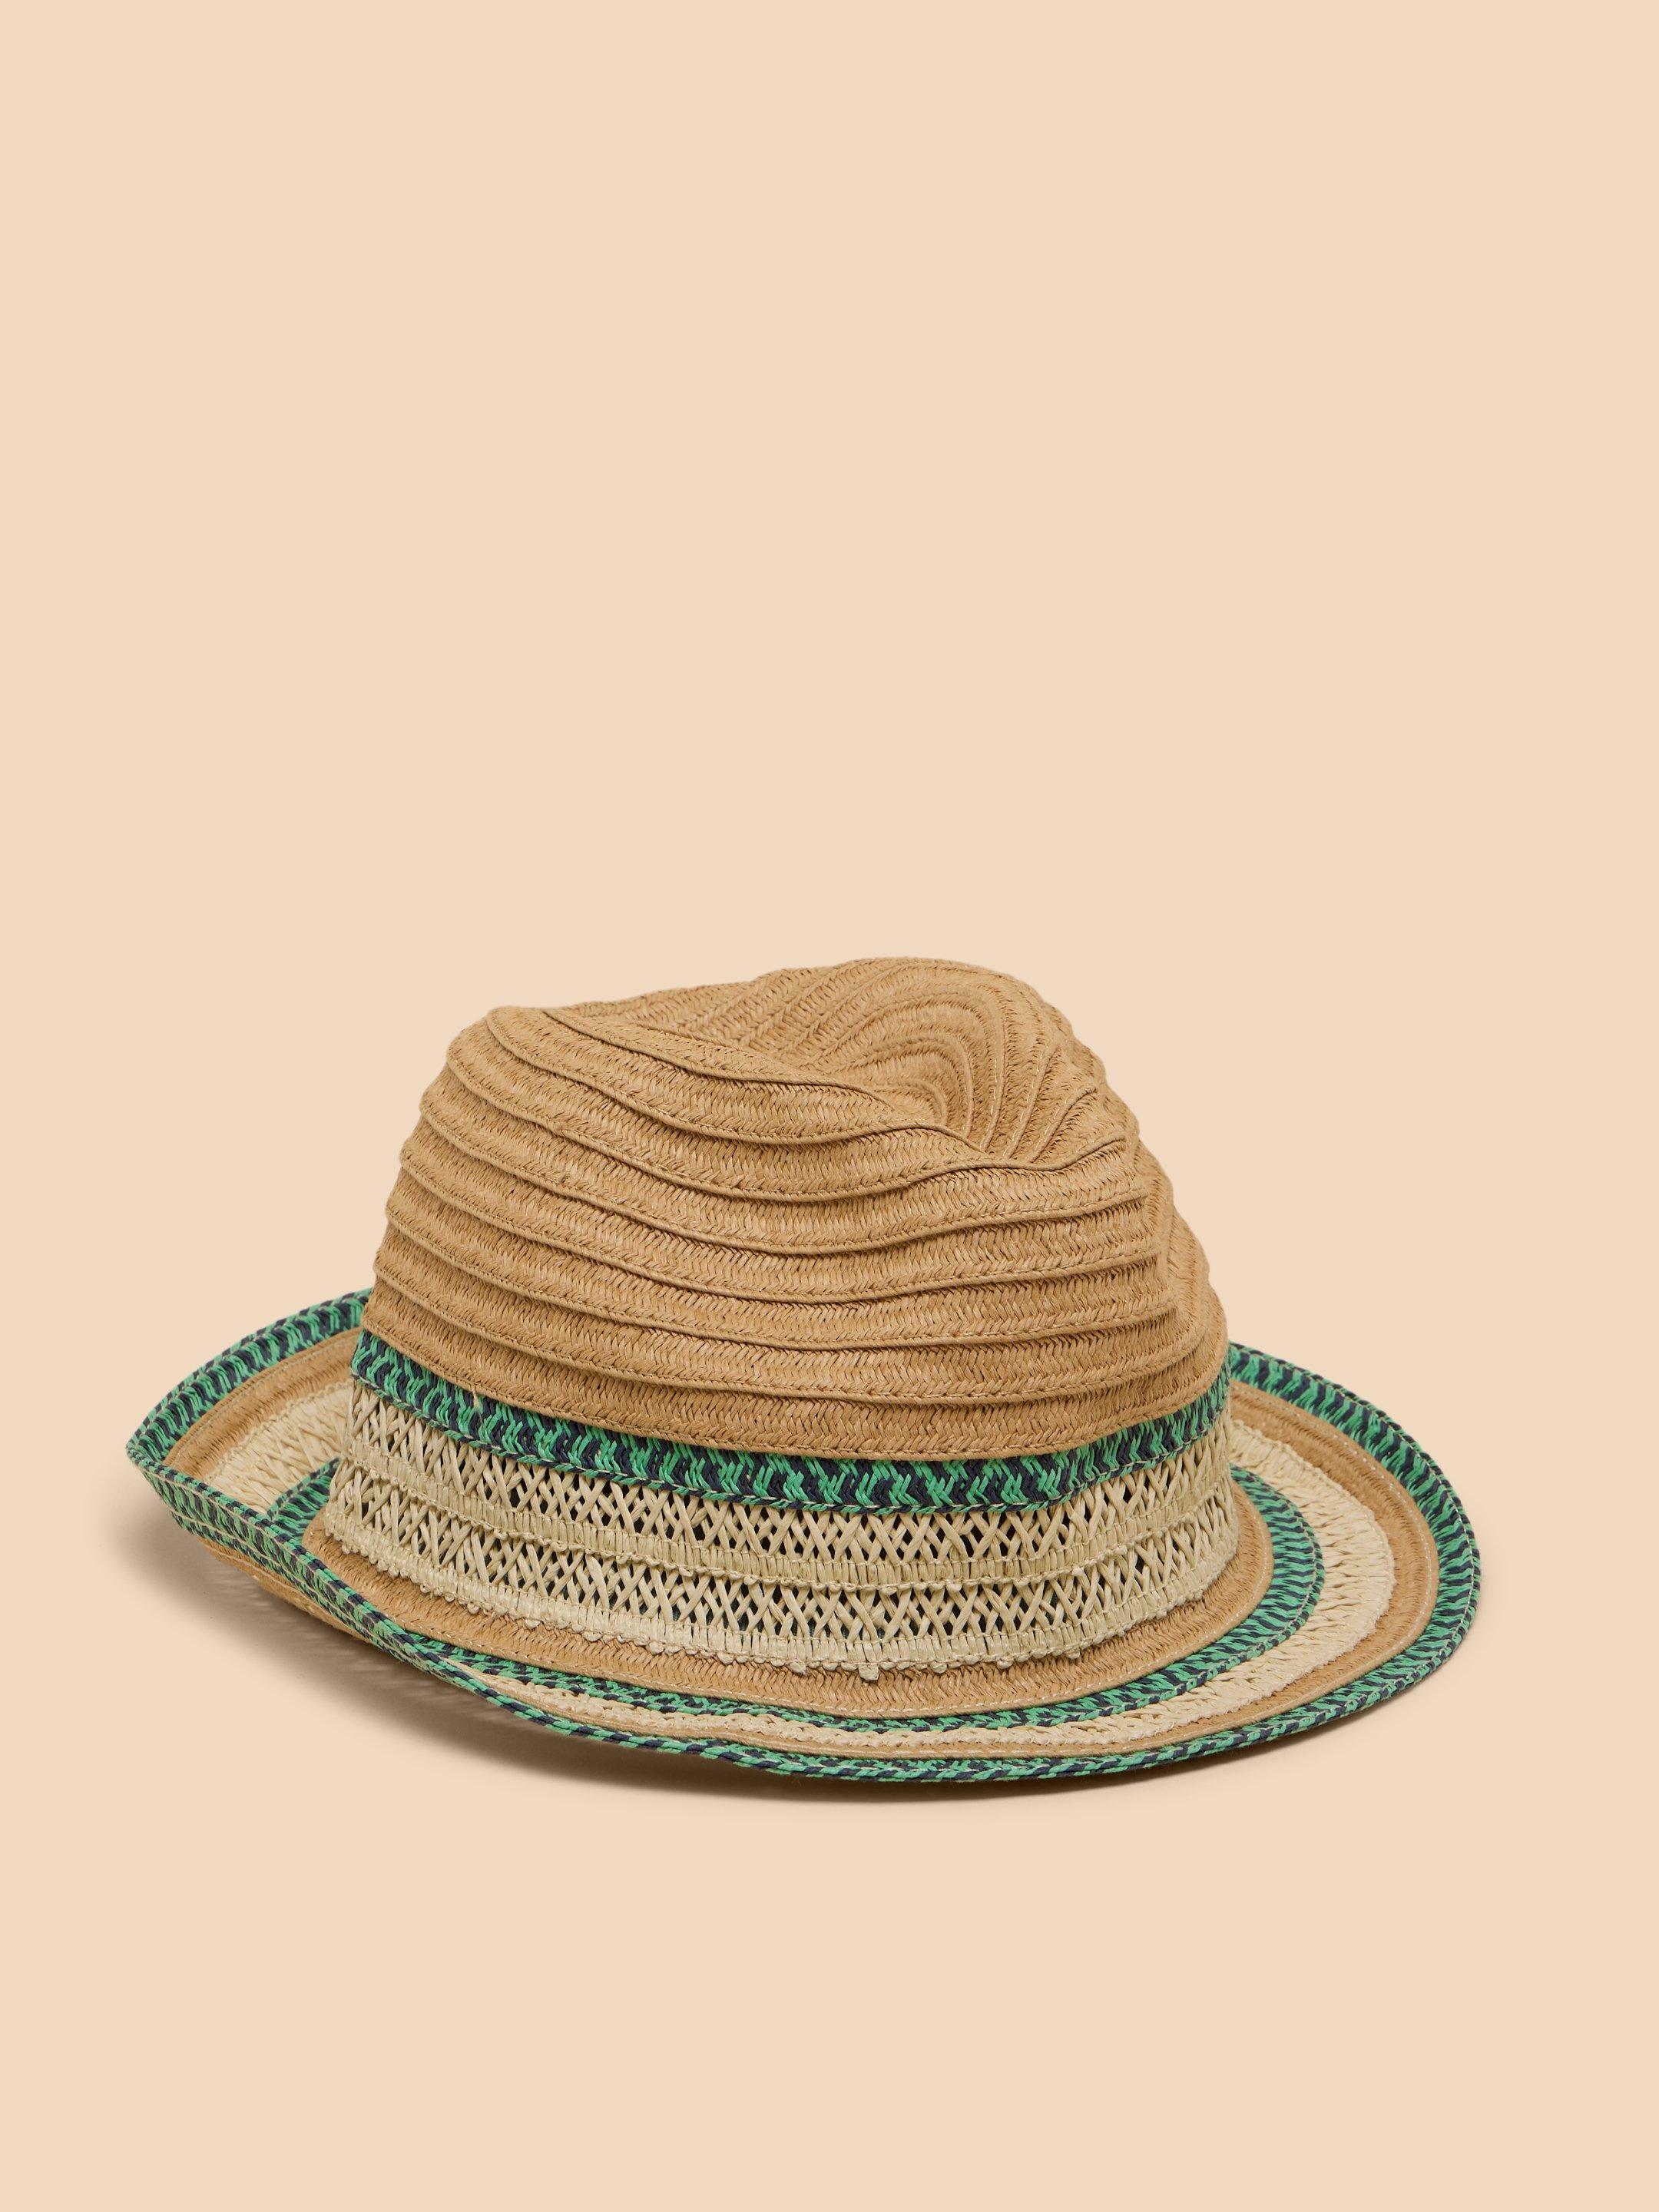 Textured Trilby Hat in NAT MLT - FLAT FRONT